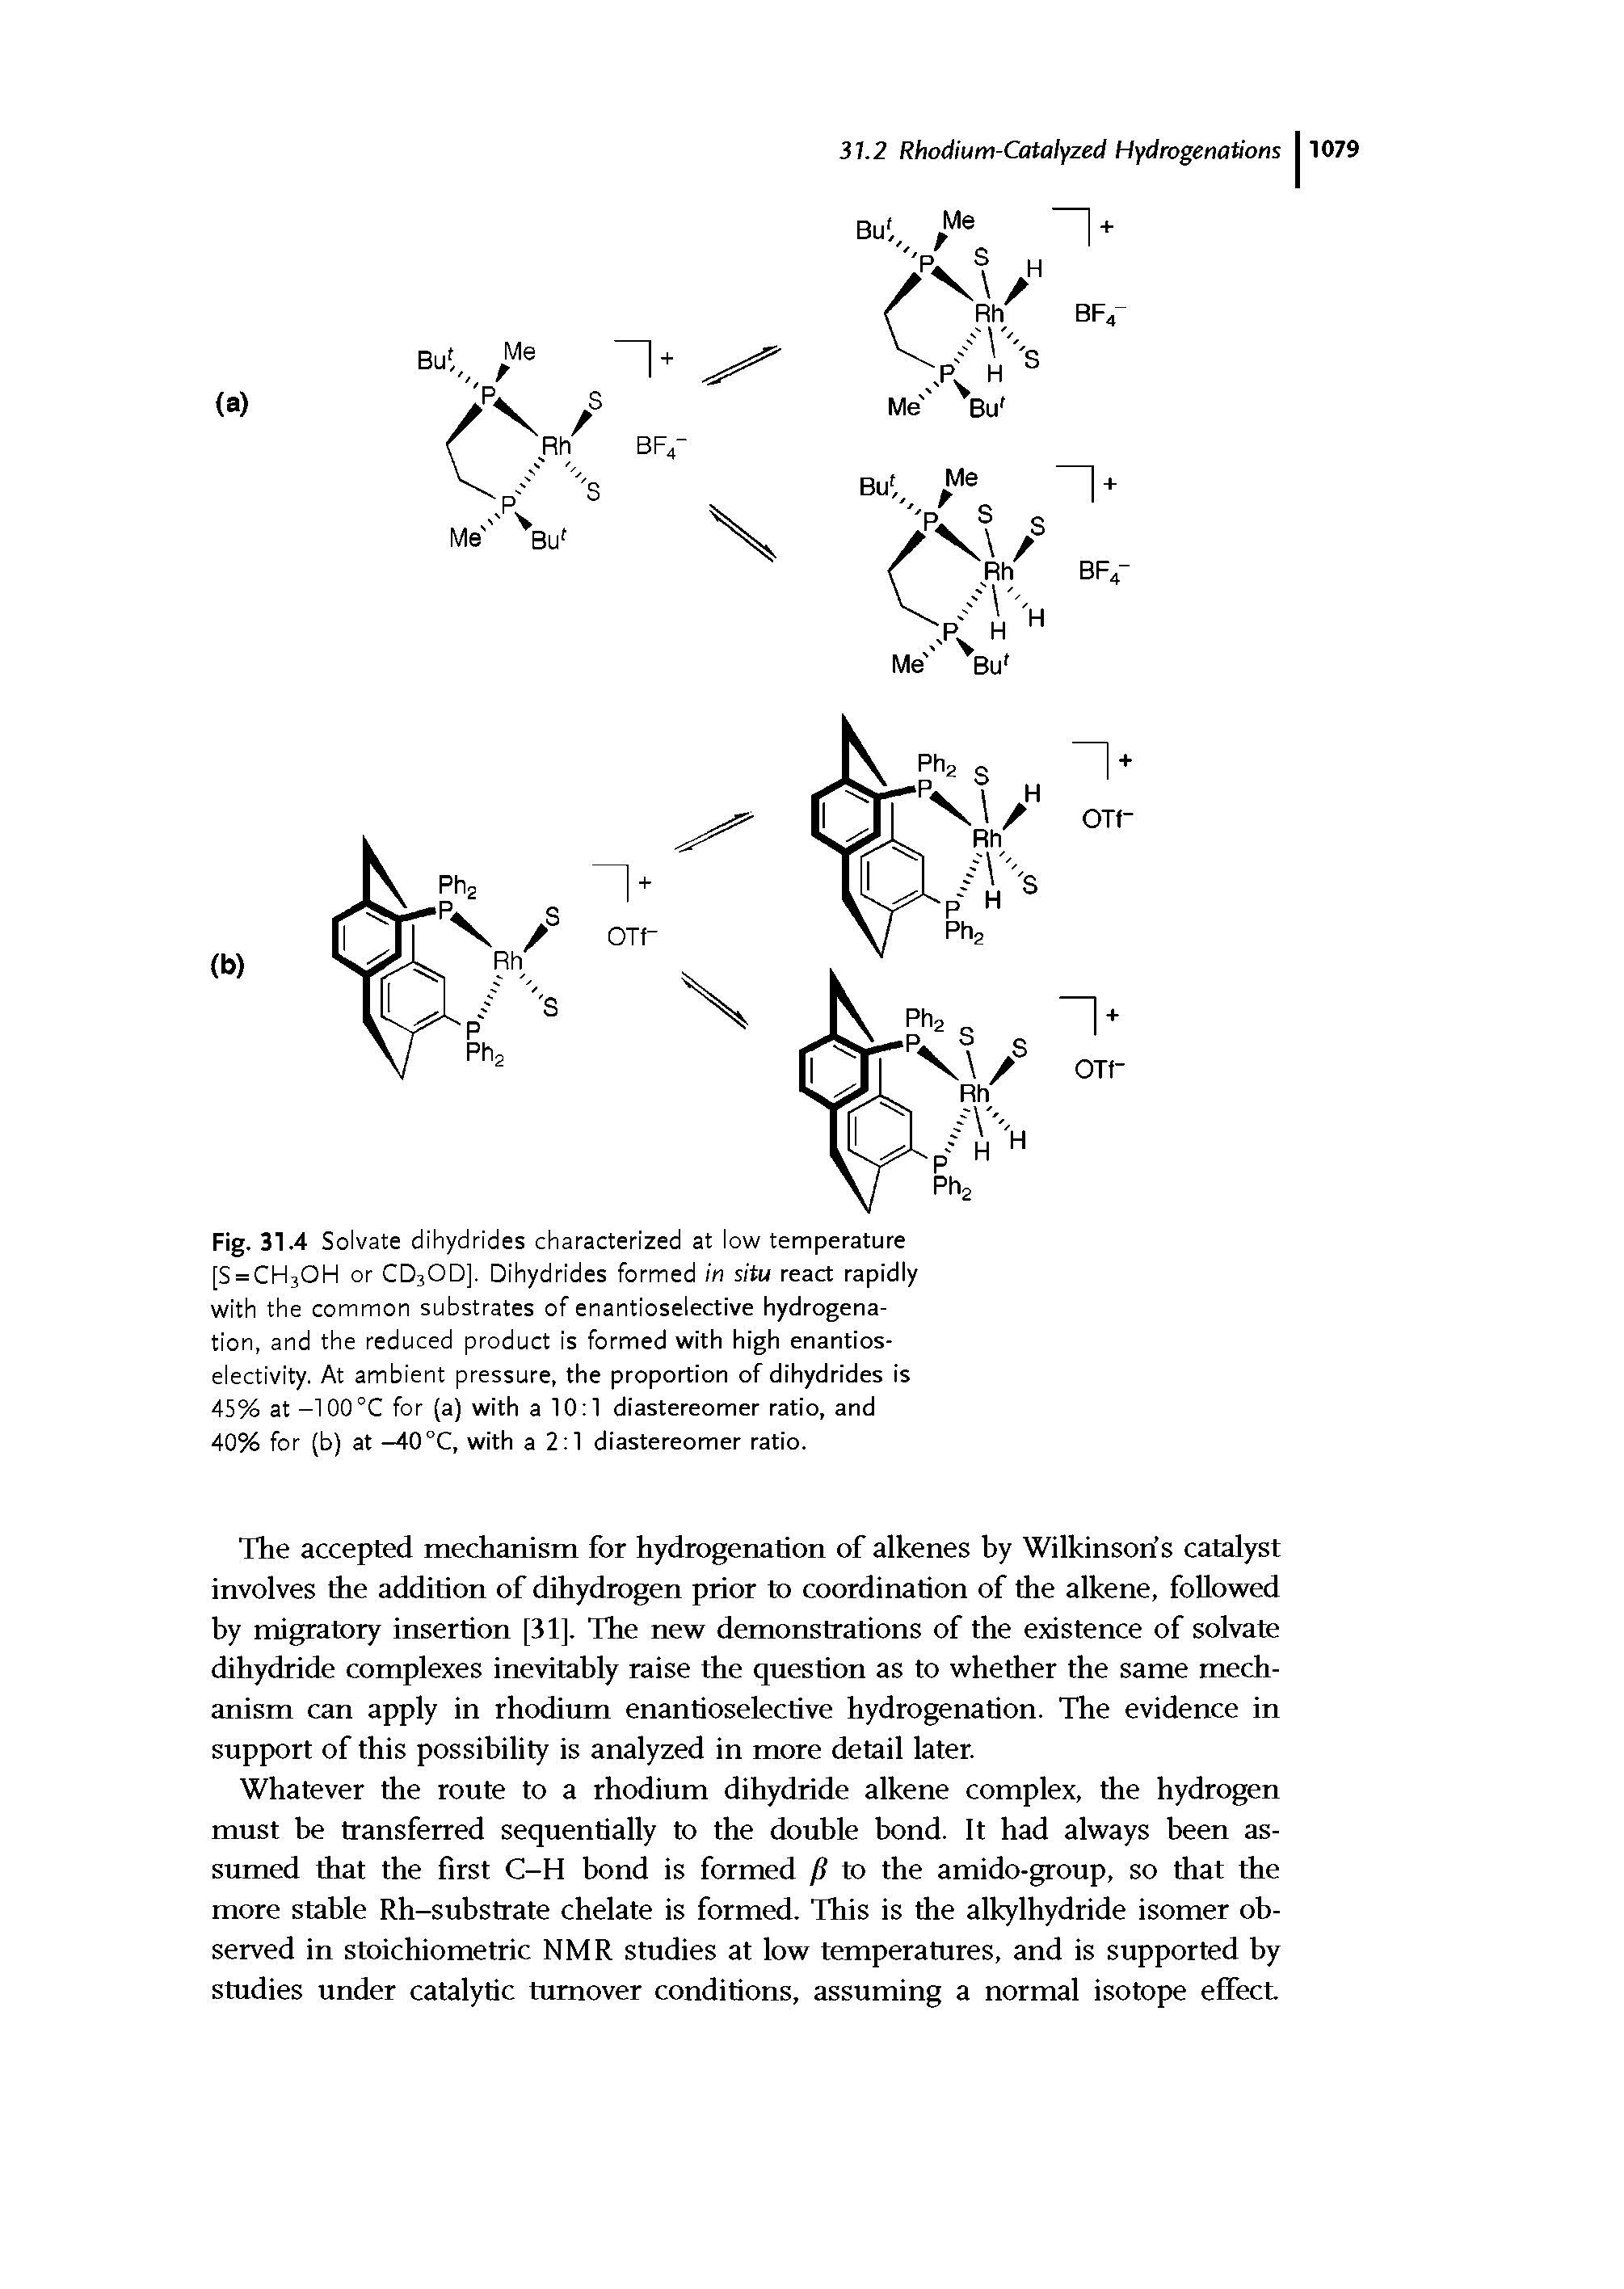 Fig. 31.4 Solvate dihydrides characterized at low temperature [S = CH3OH or CD3OD]. Dihydrides formed in situ react rapidly with the common substrates of enantioselective hydrogenation, and the reduced product is formed with high enantios-electivity. At ambient pressure, the proportion of dihydrides is 45% at -100°C for (a) with a 10 1 diastereomer ratio, and 40% for (b) at —40°C, with a 2 1 diastereomer ratio.